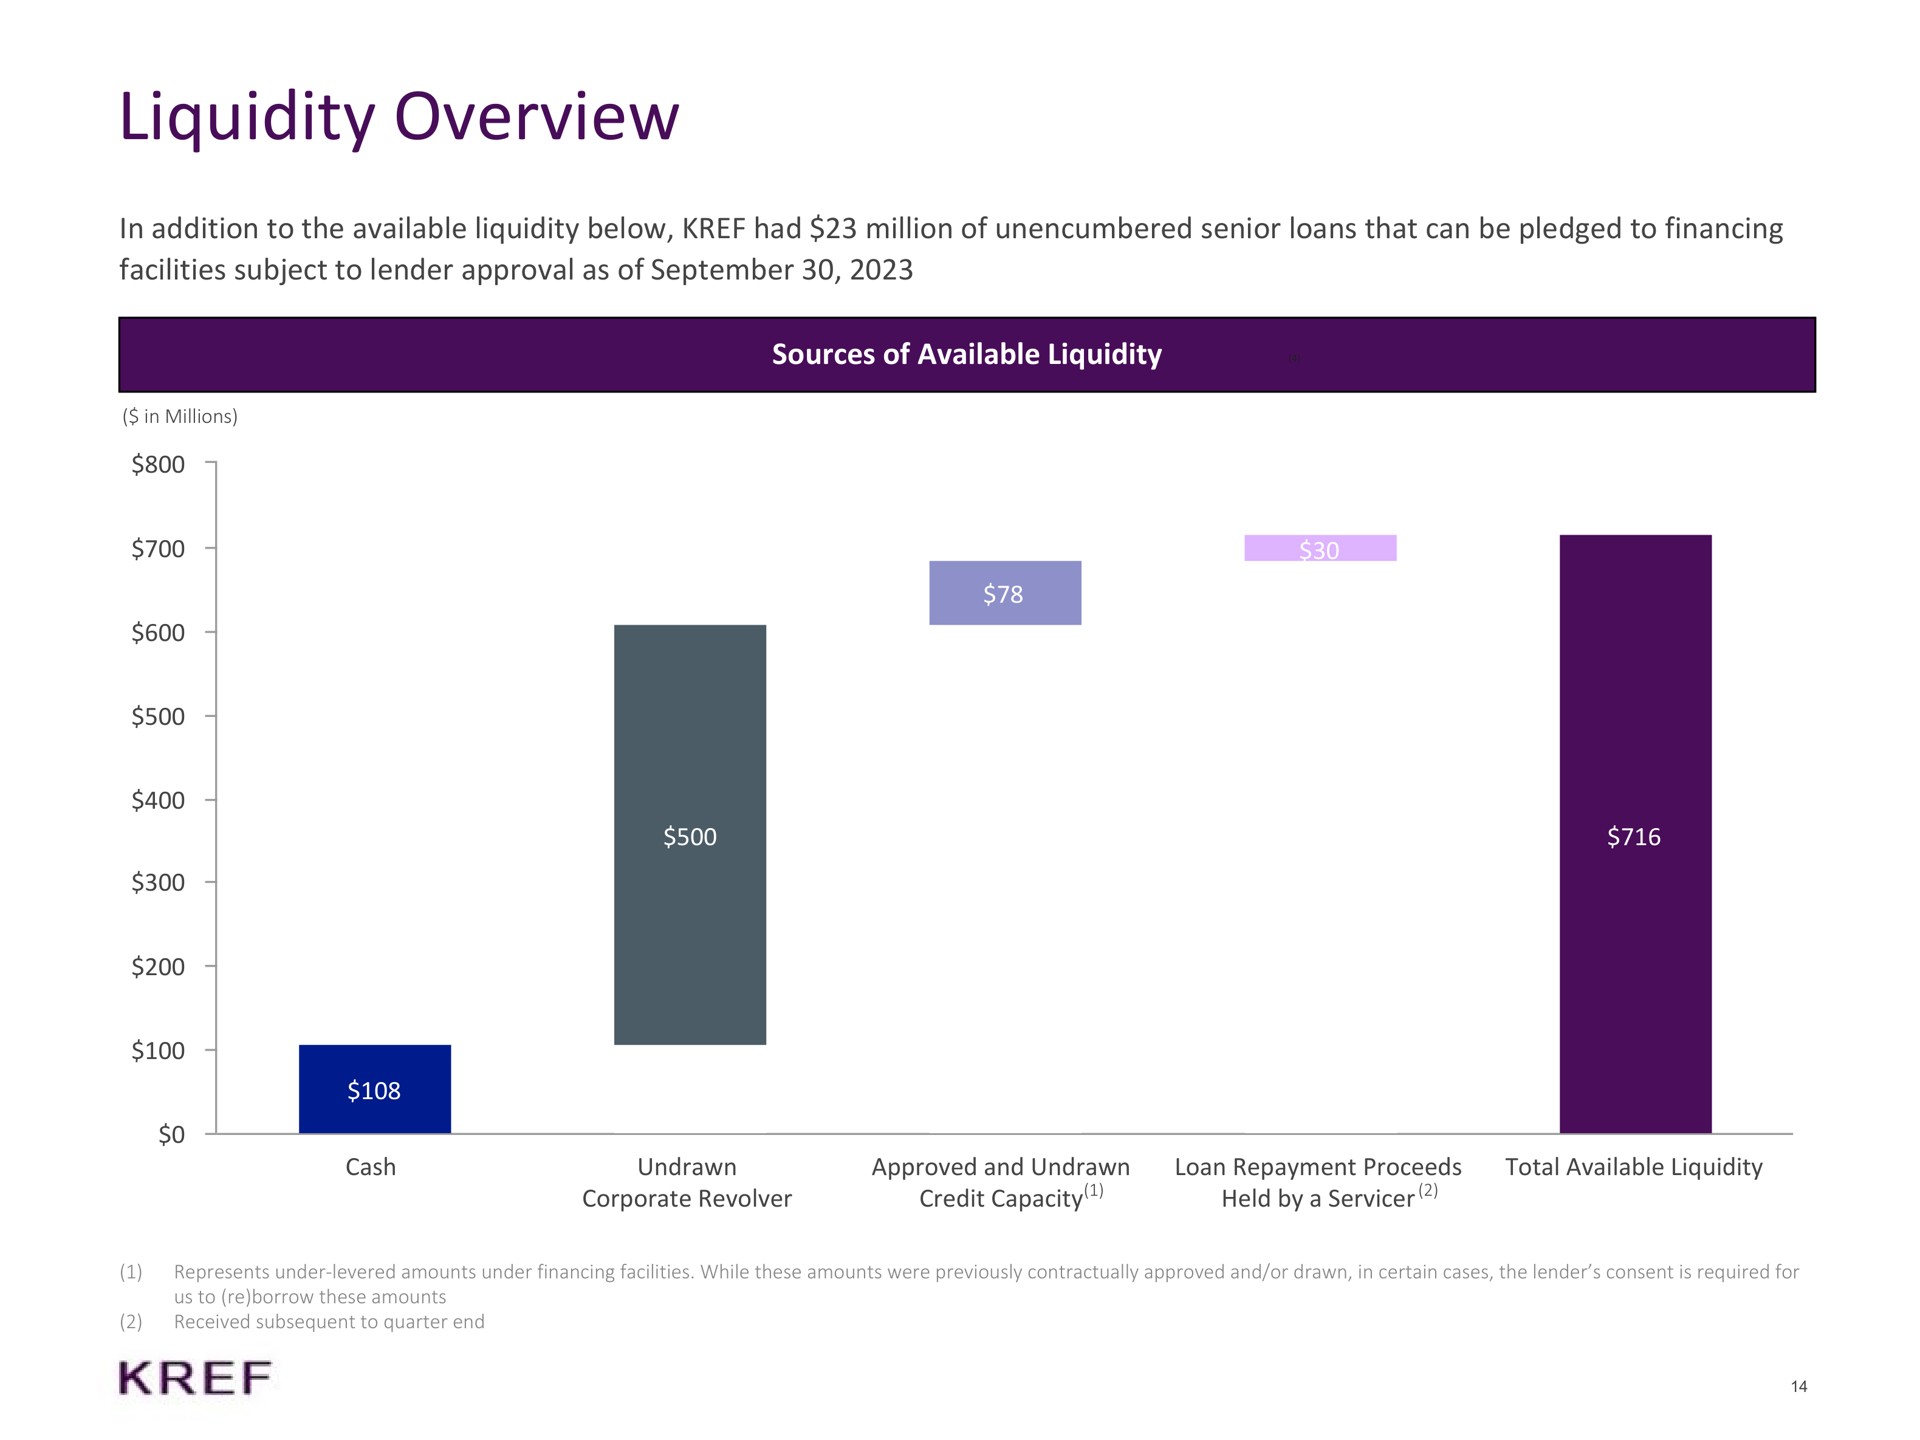 liquidity overview in addition to the available liquidity below had million of unencumbered senior loans that can be pledged to financing facilities subject to lender approval as of sources of available liquidity corporate revolver credit capacity held by a | KKR Real Estate Finance Trust